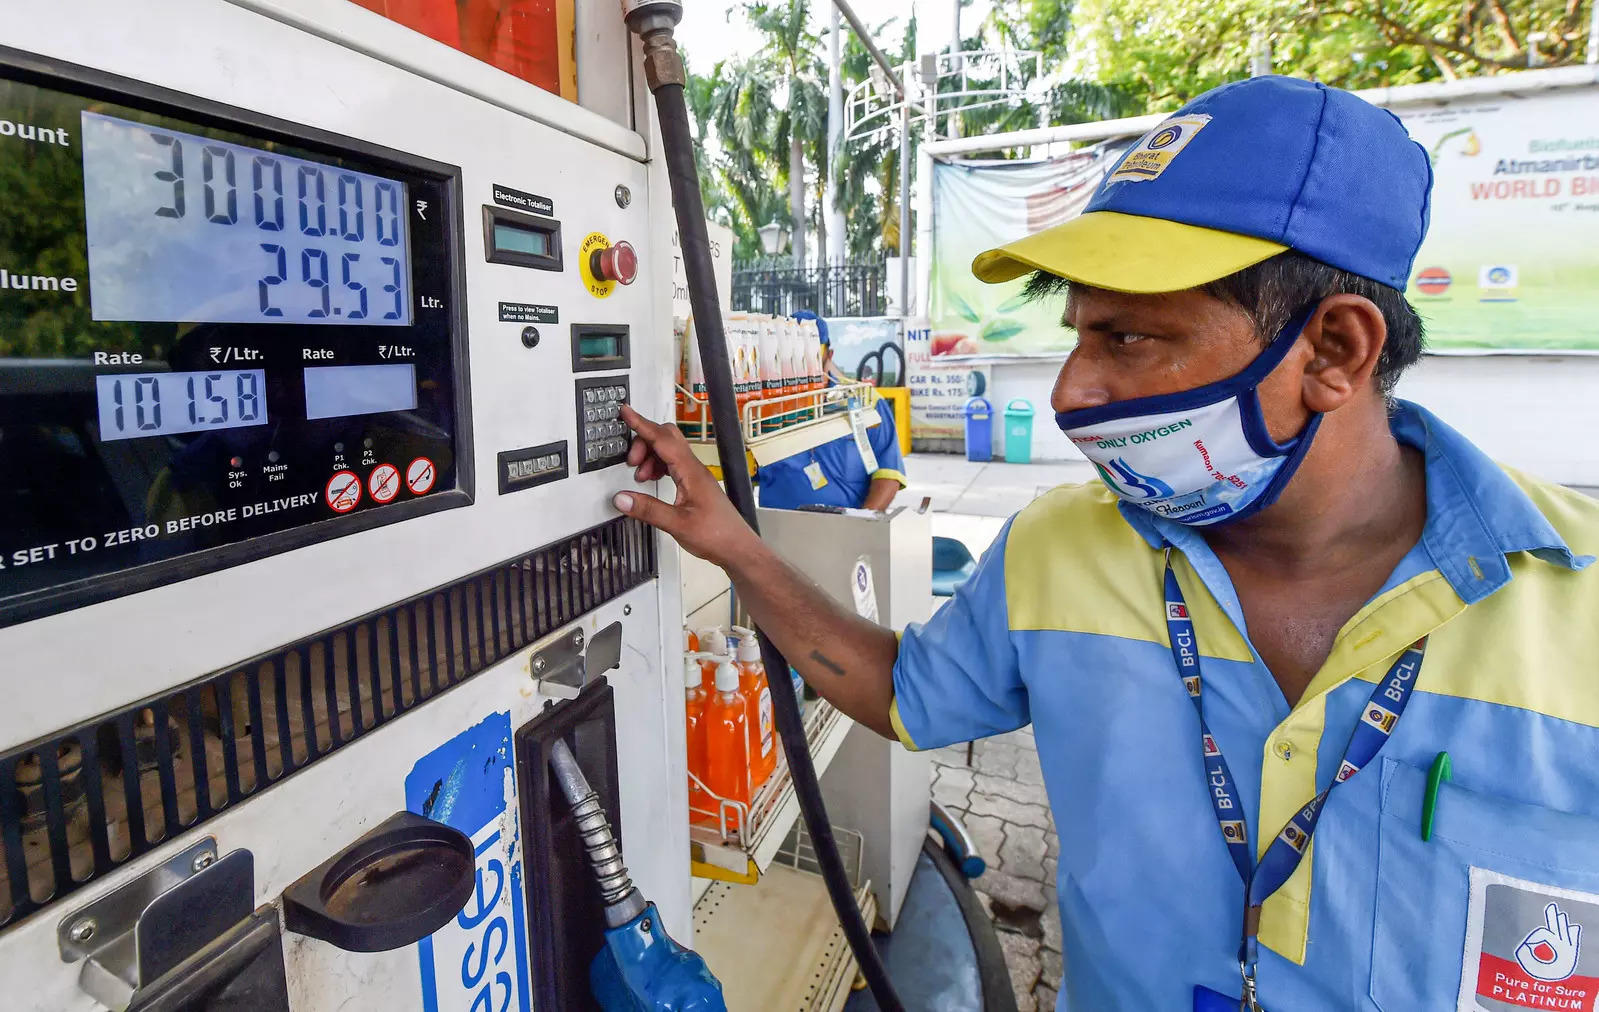 Govt's annual excise collections this year on petrol, diesel jump 88 % to INR 3.35 lakh crore